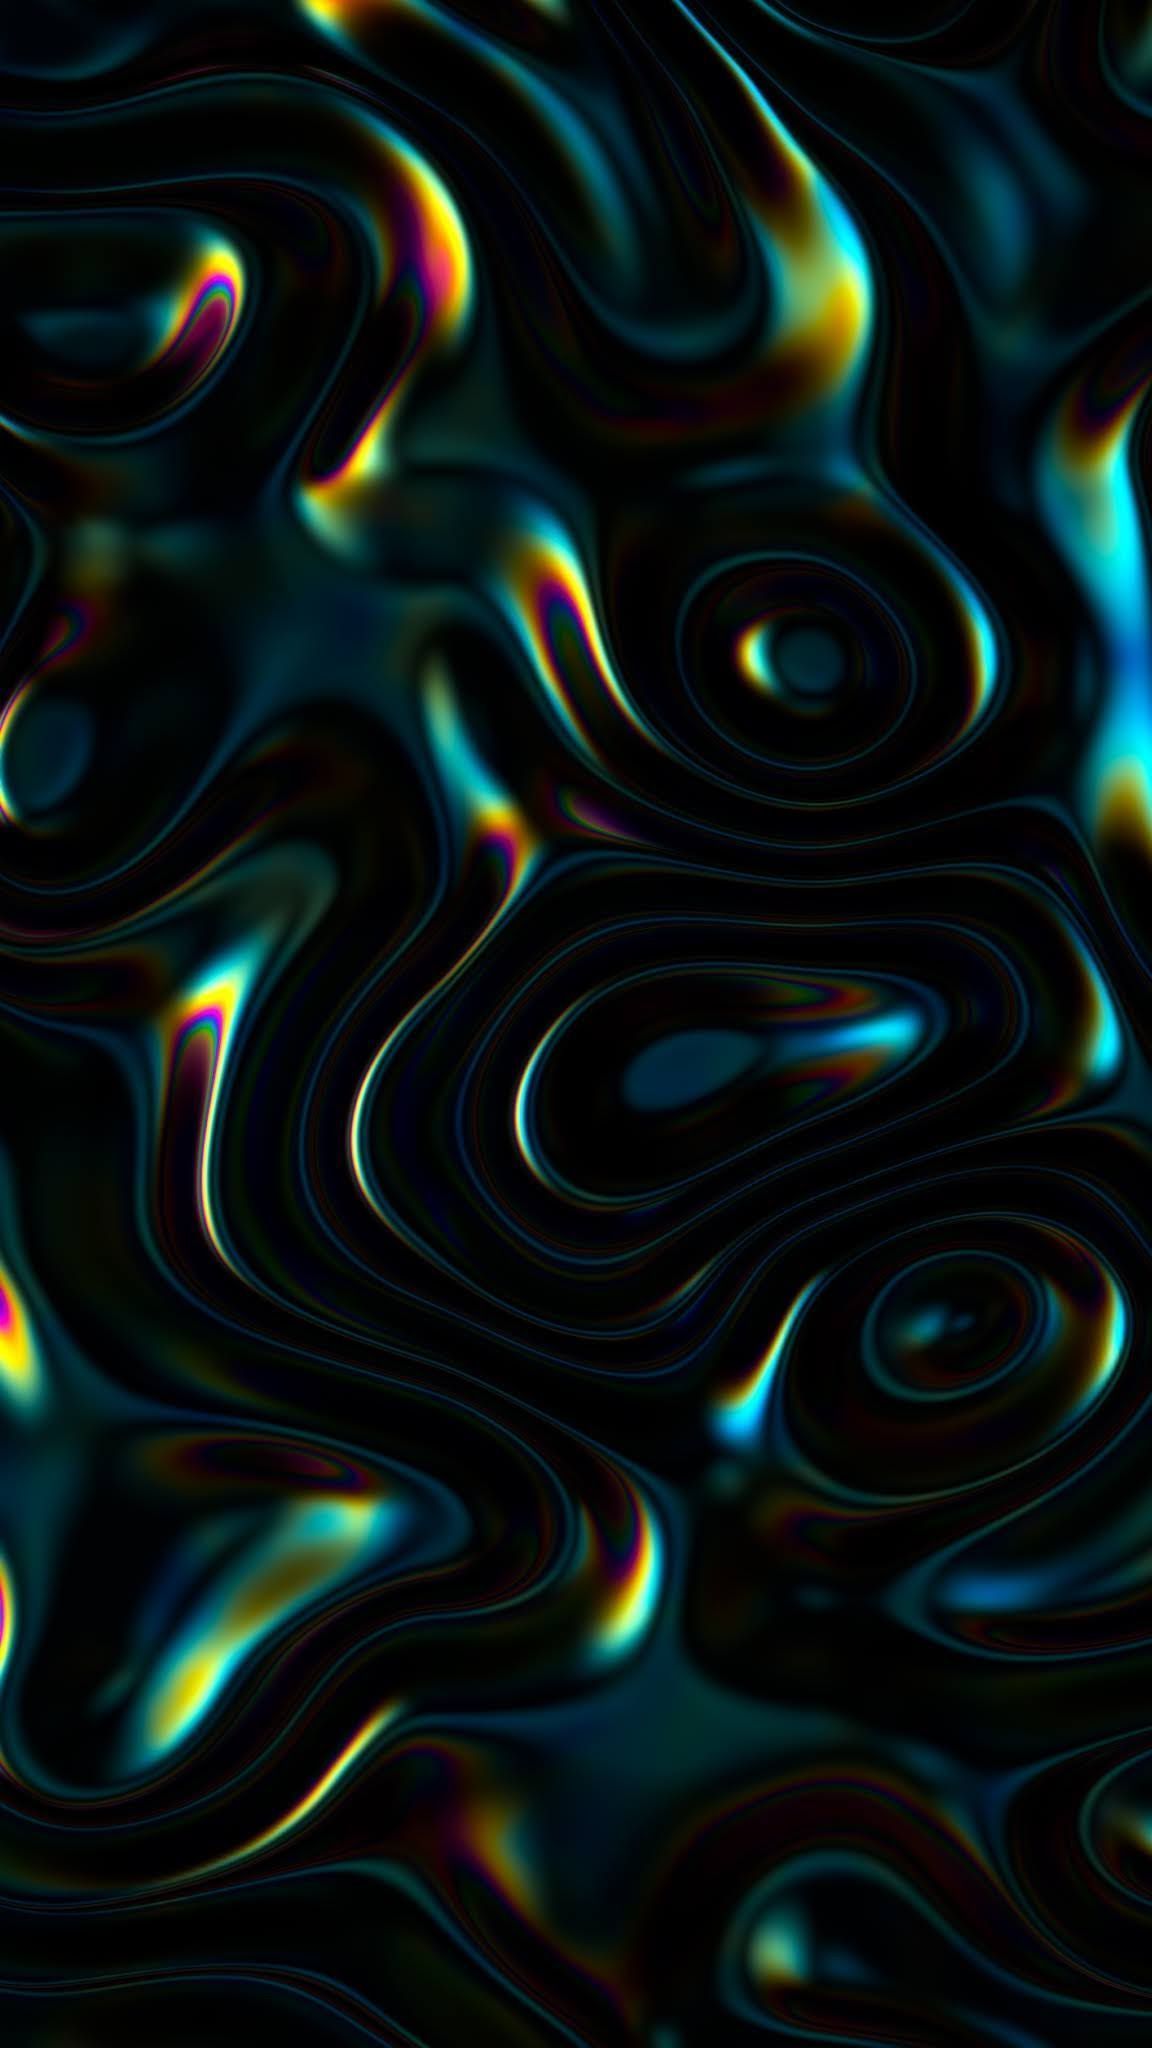 A black background with colorful swirls and waves - Dark, abstract, iridescent